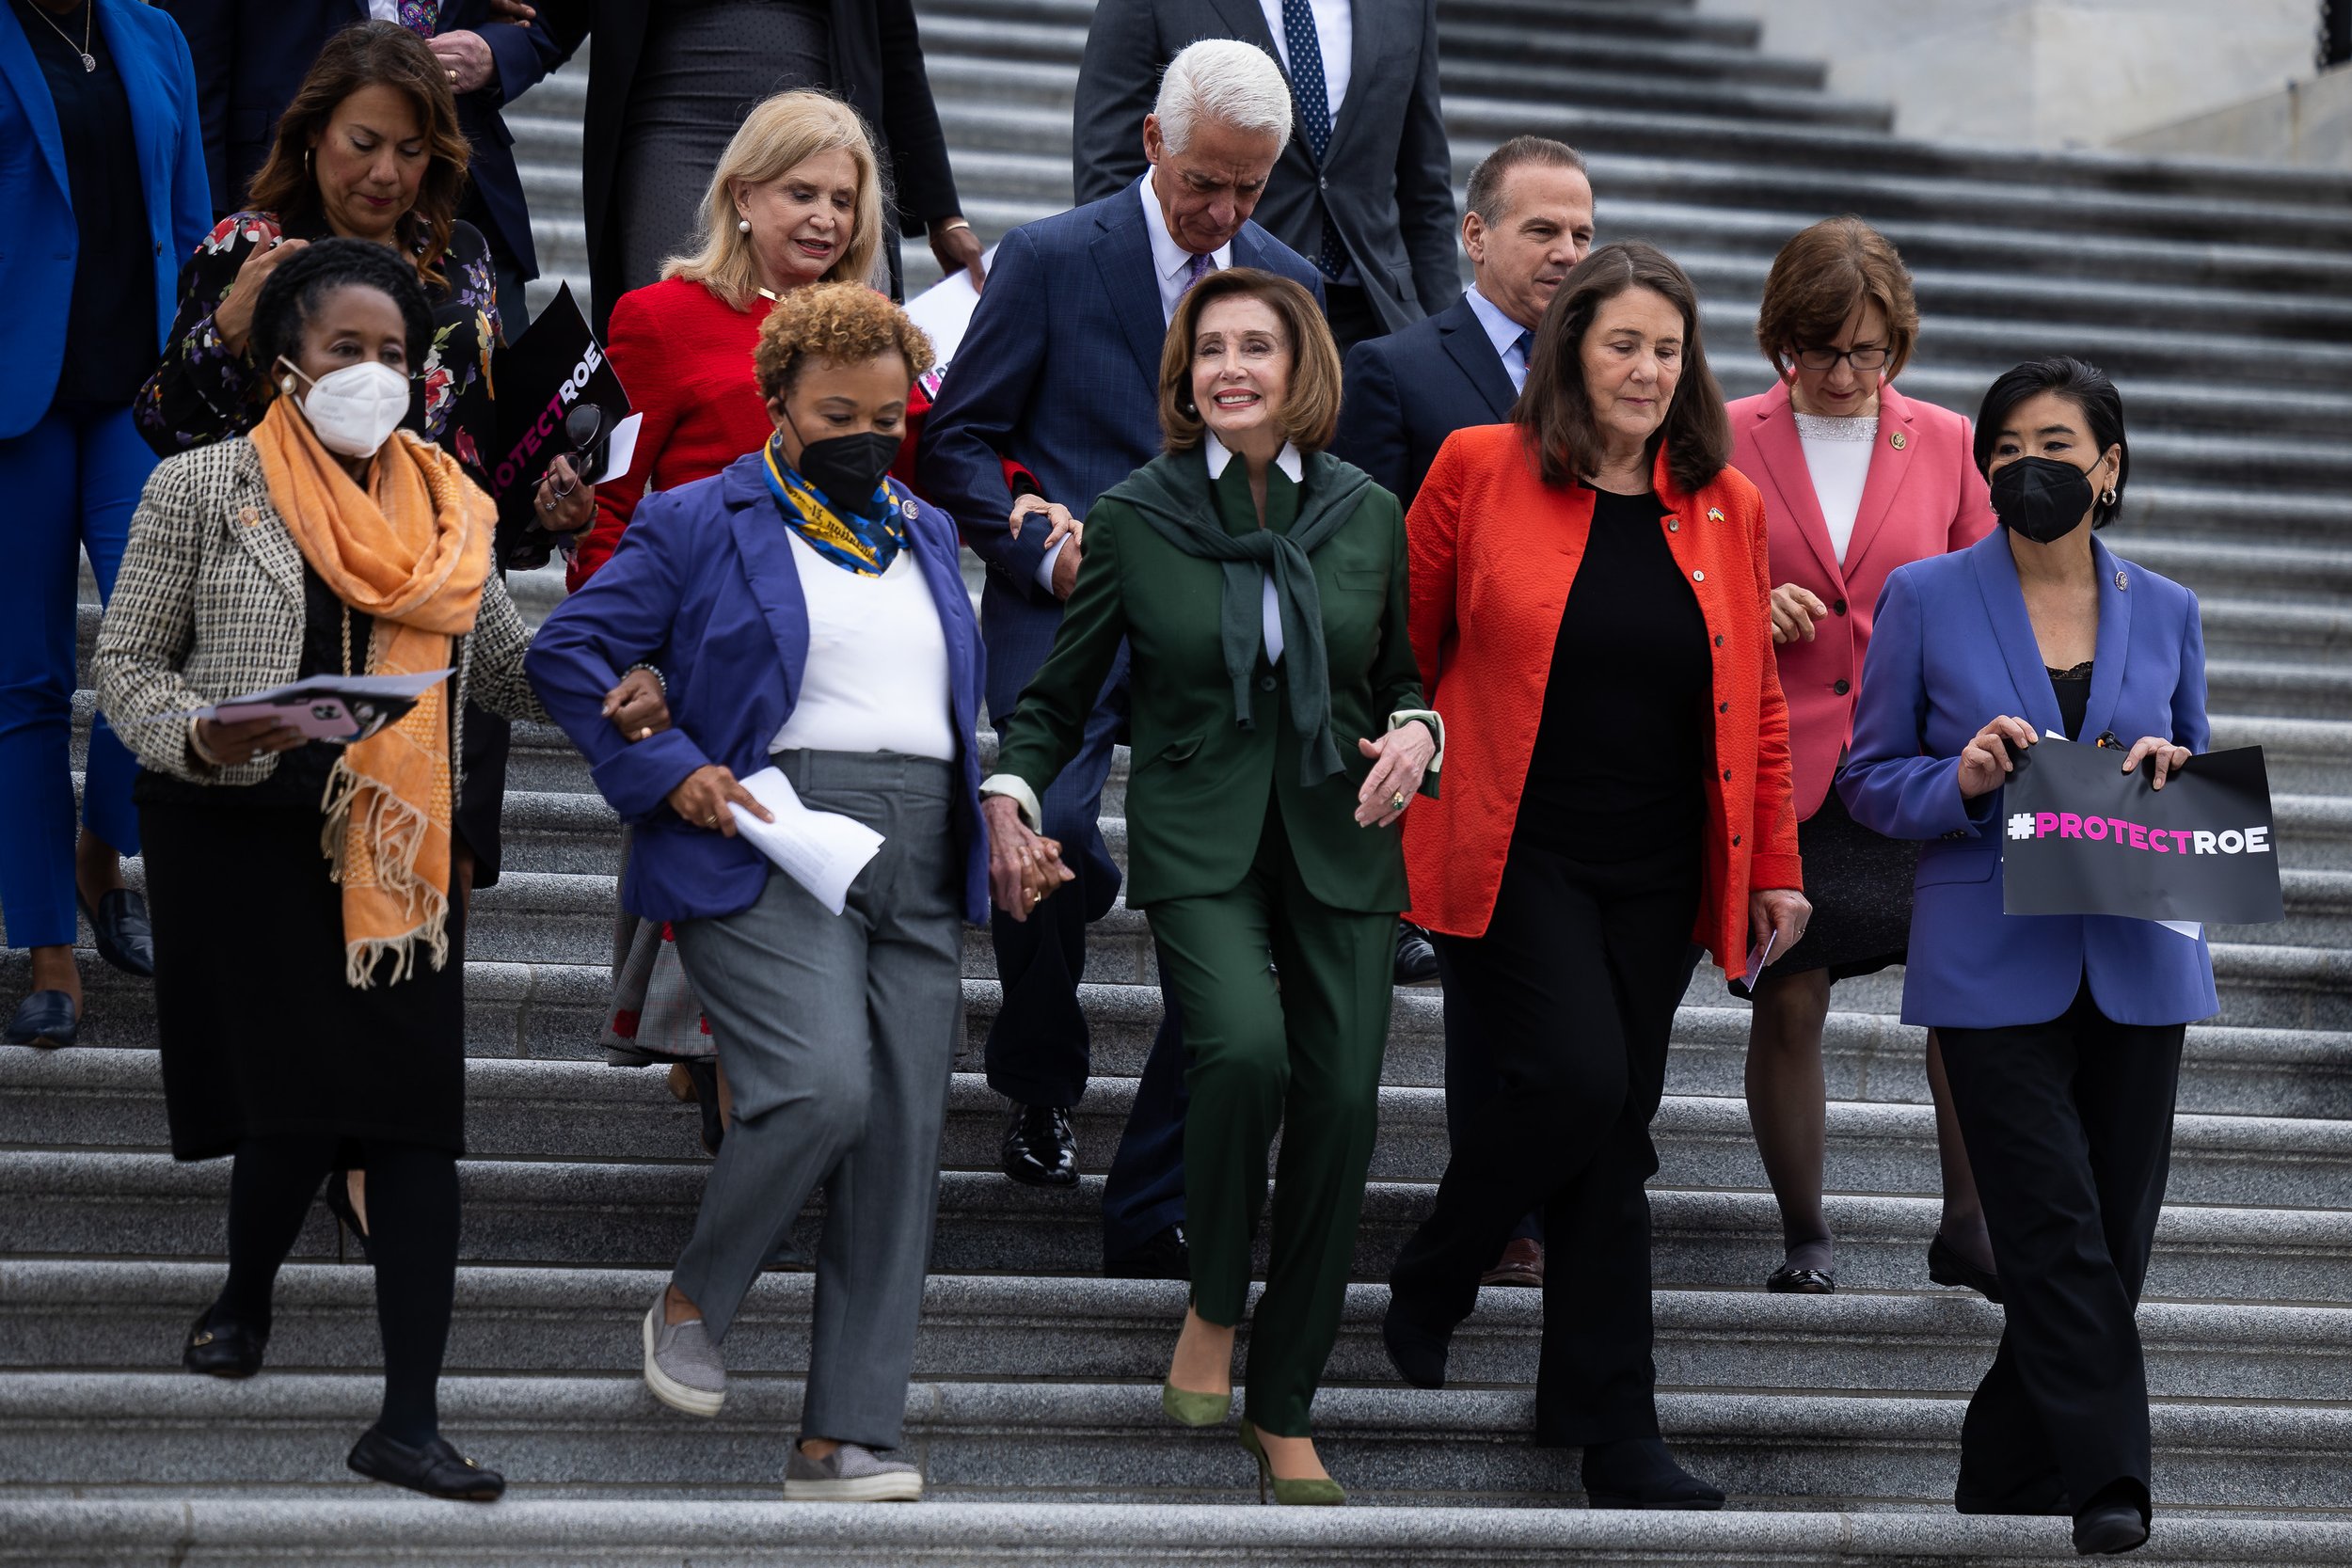  House Speaker Nancy Pelosi (D-Calif.) and other House Democrats arrive for a press conference in response to the leaked Supreme Court draft opinion that indicated the court was poised to overturn Roe v. Wade outside the U.S. Capitol May 13, 2022.  